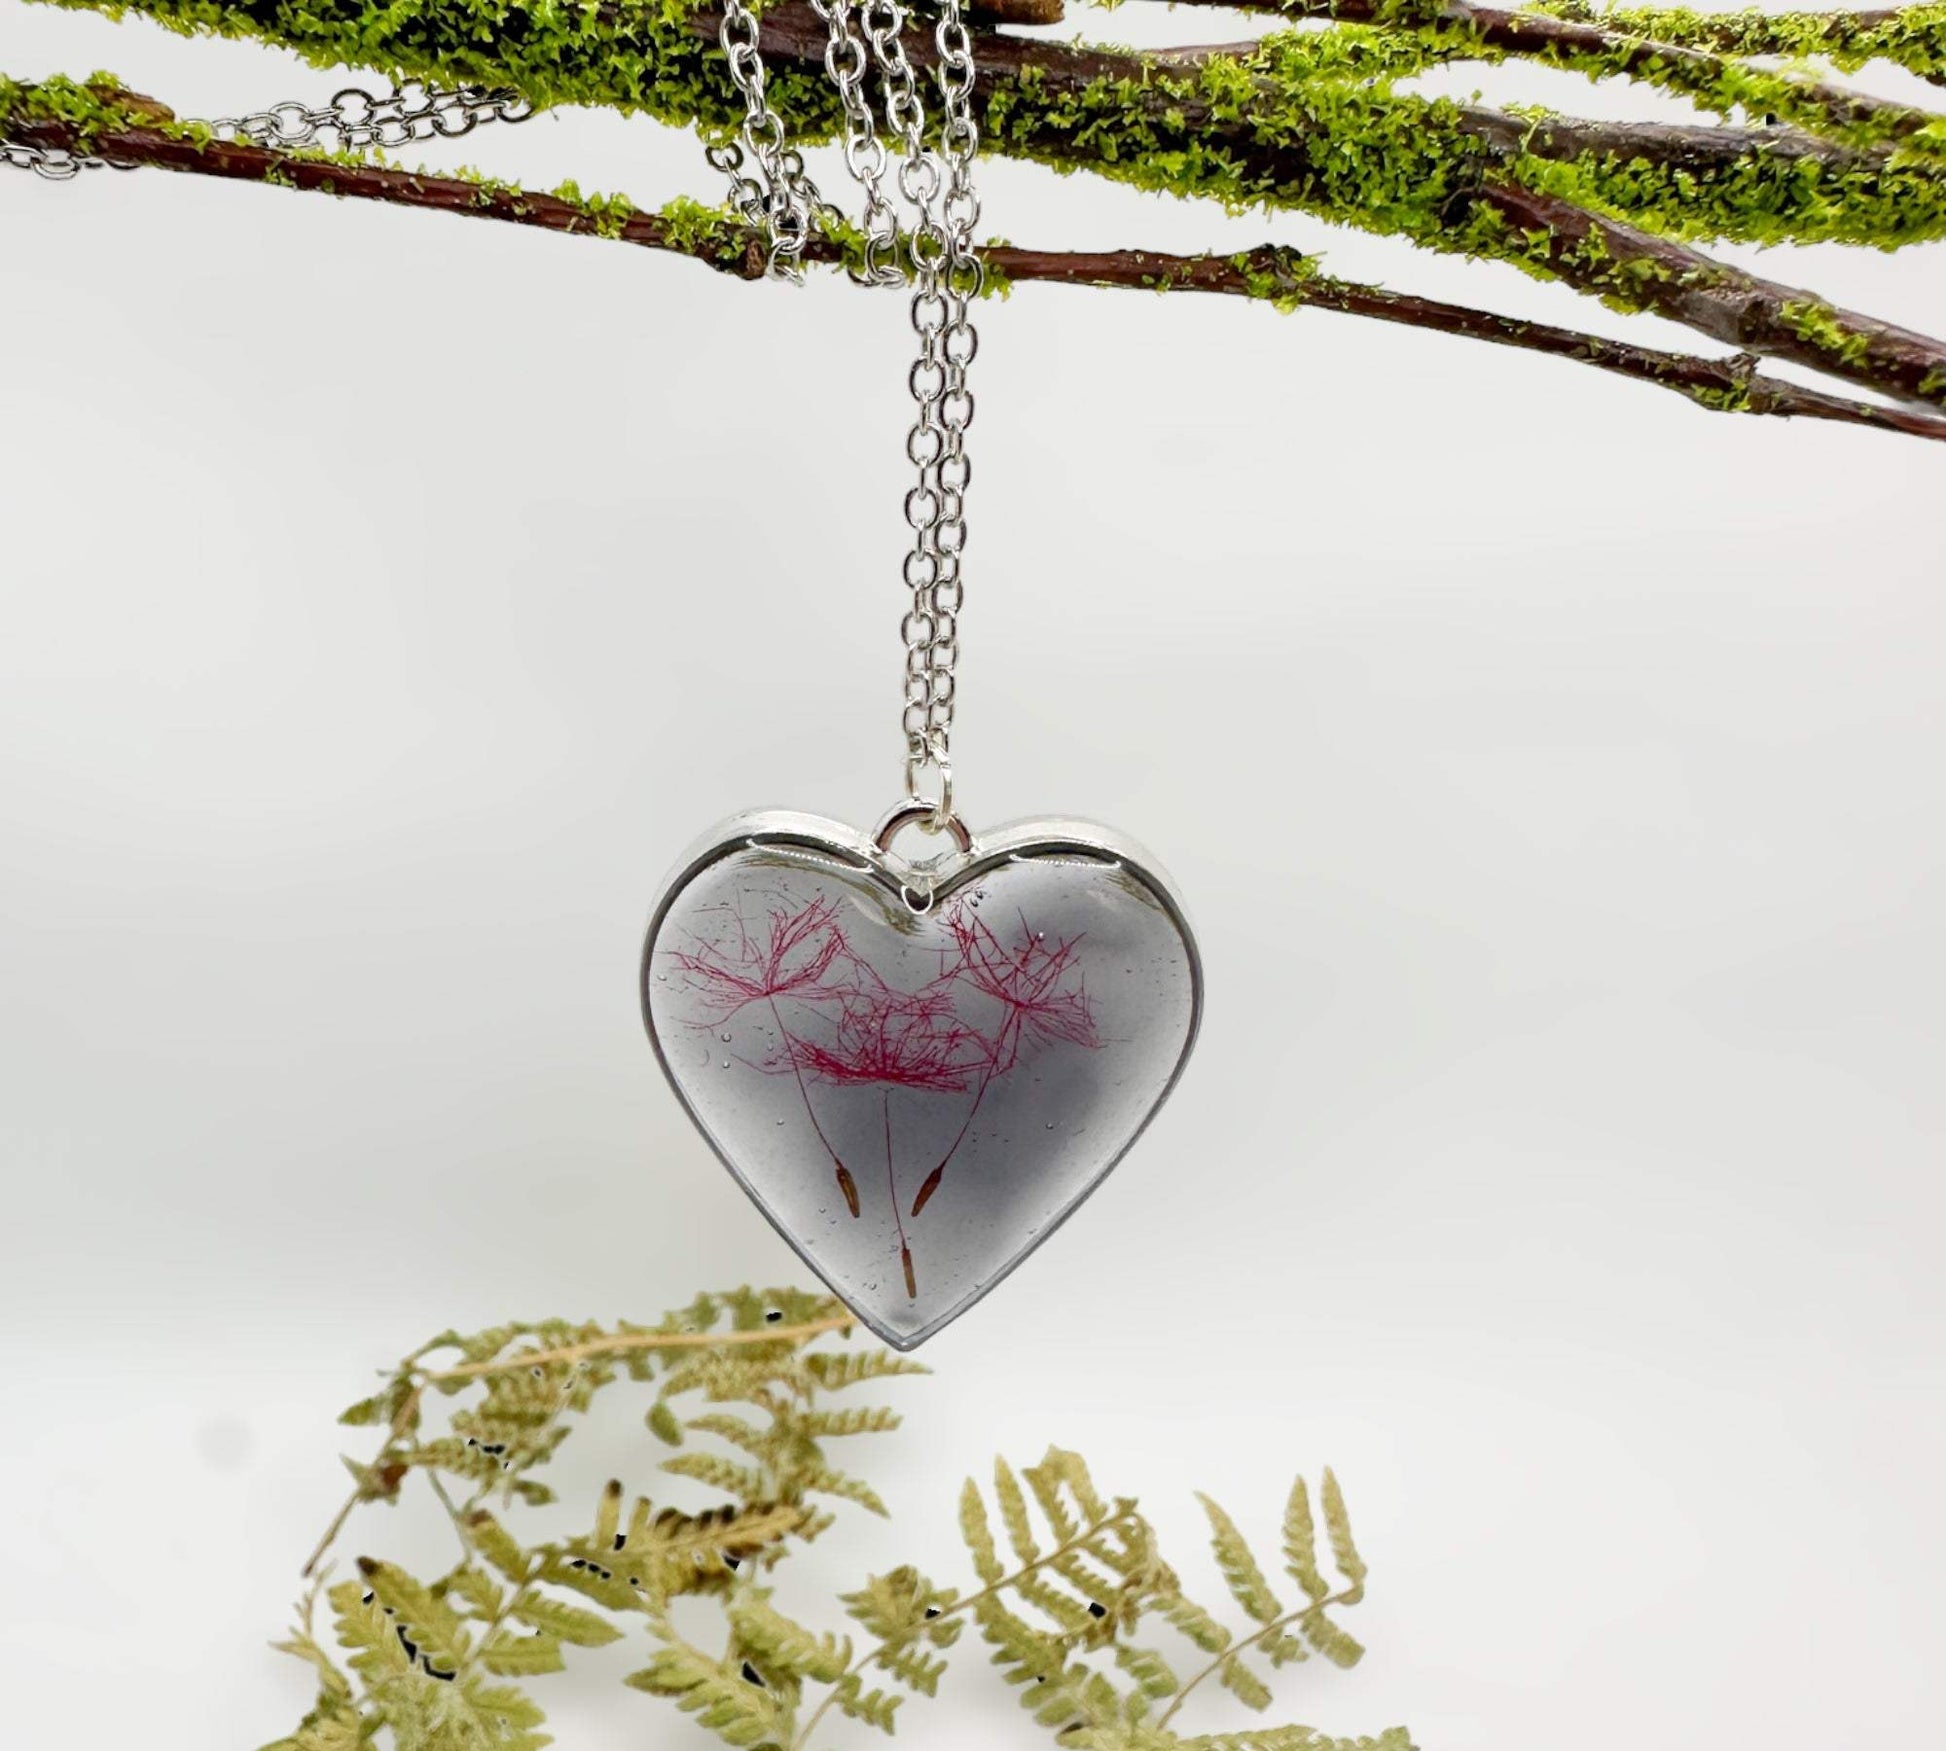 Fairy Wishes - Love & Wishes - Heart Resin Pendant with Fairy Wishes